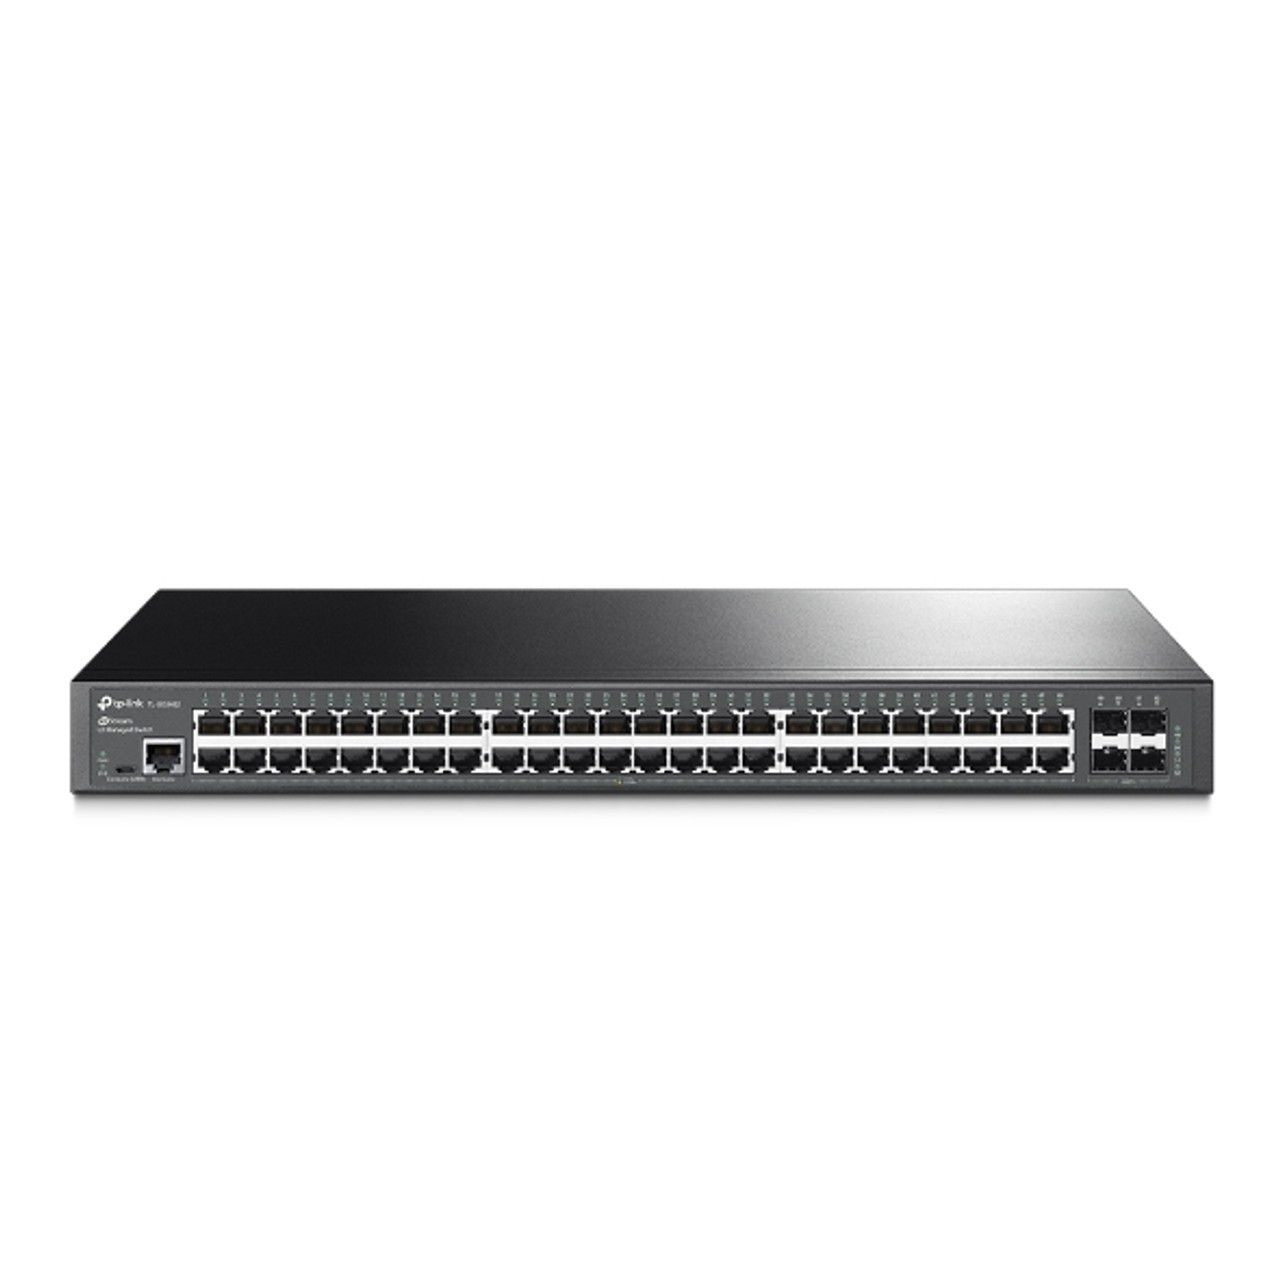 TP-LINK TL-SG3452 JetStream Omada Slots, (L-NWTL-SG3452) SDN, into Routing 48-Port SFP at shop Switch Gigabit Integrated Managed Static Management, with L2 AUSTiC SHOP 4 Centralised